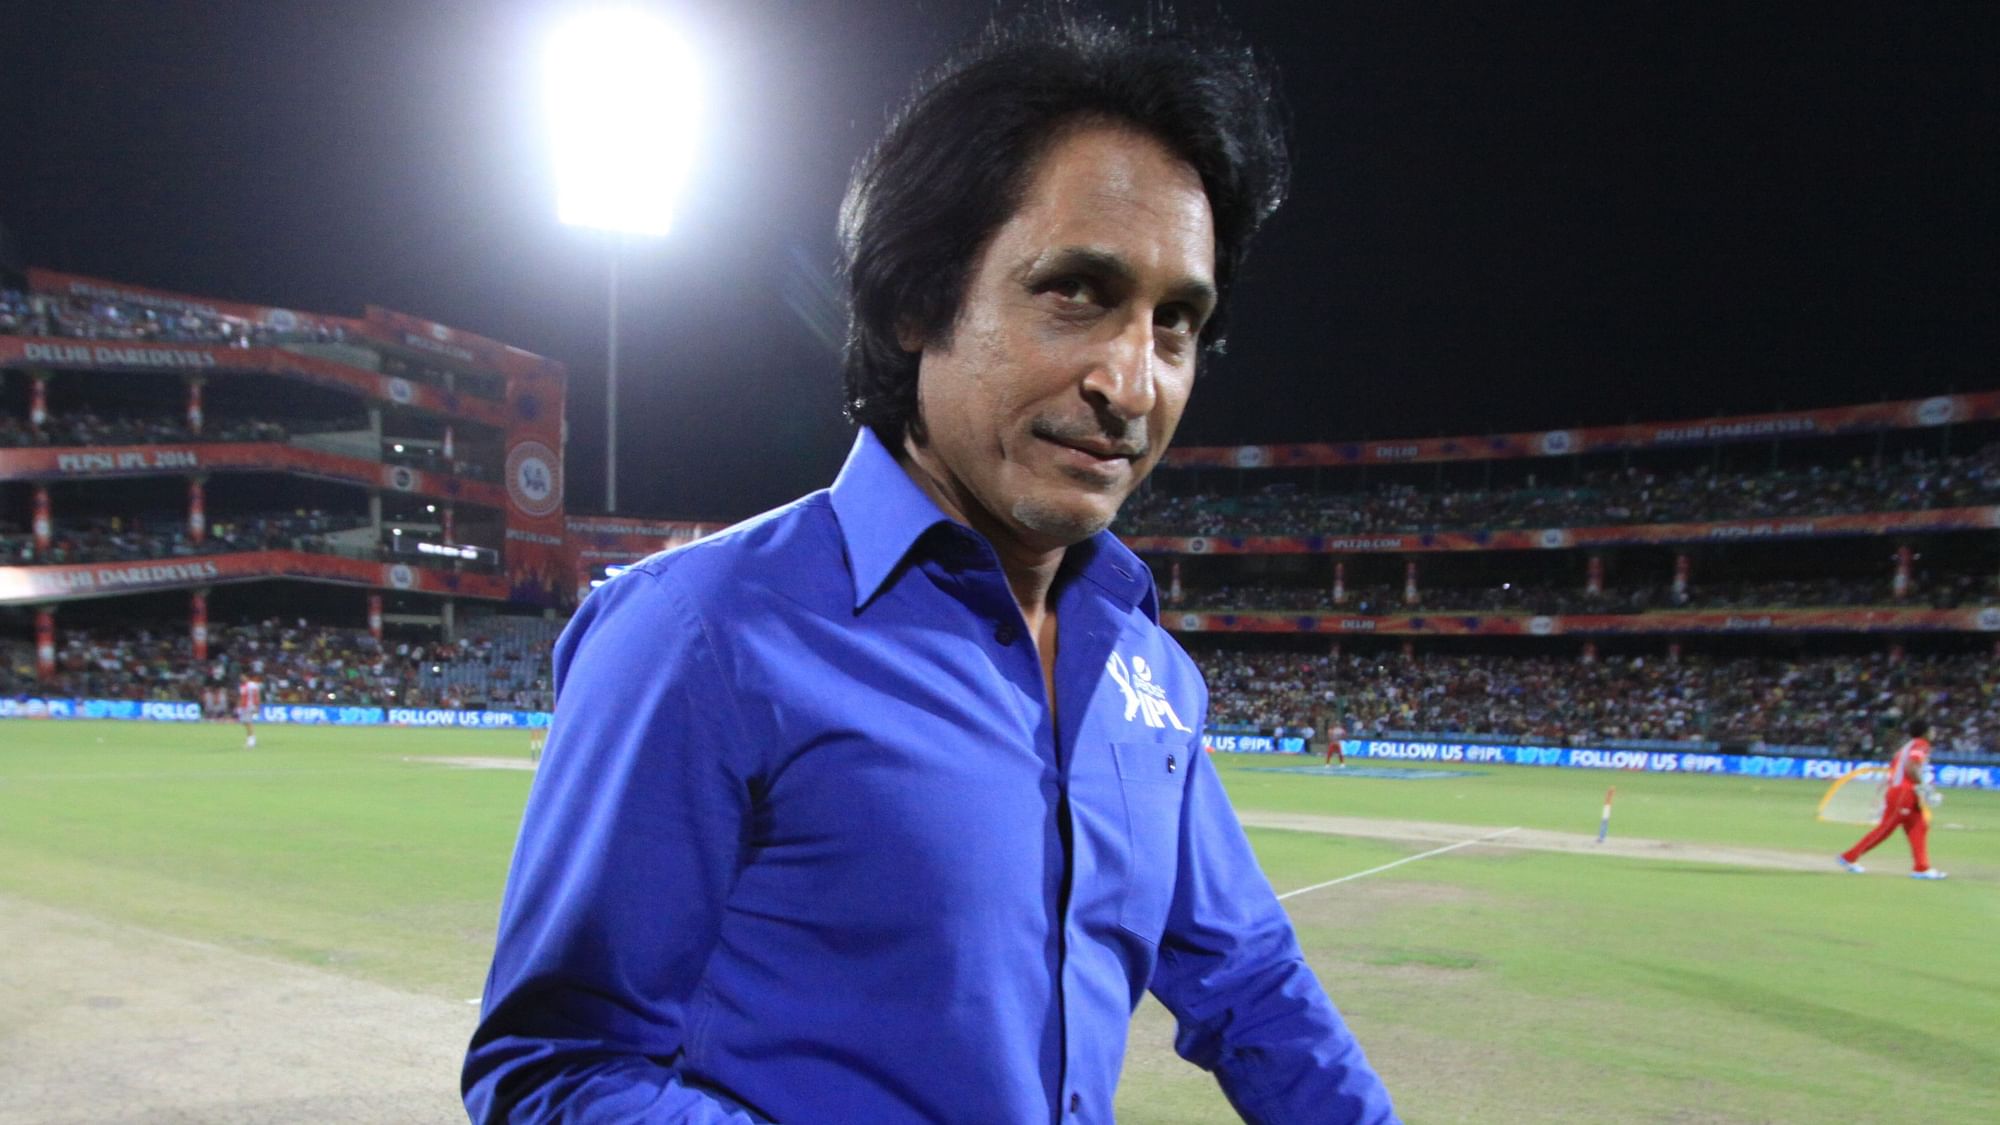 Ramiz Raja told The Quint that Shubhman Gill reminds him of a young Rohit Sharma.